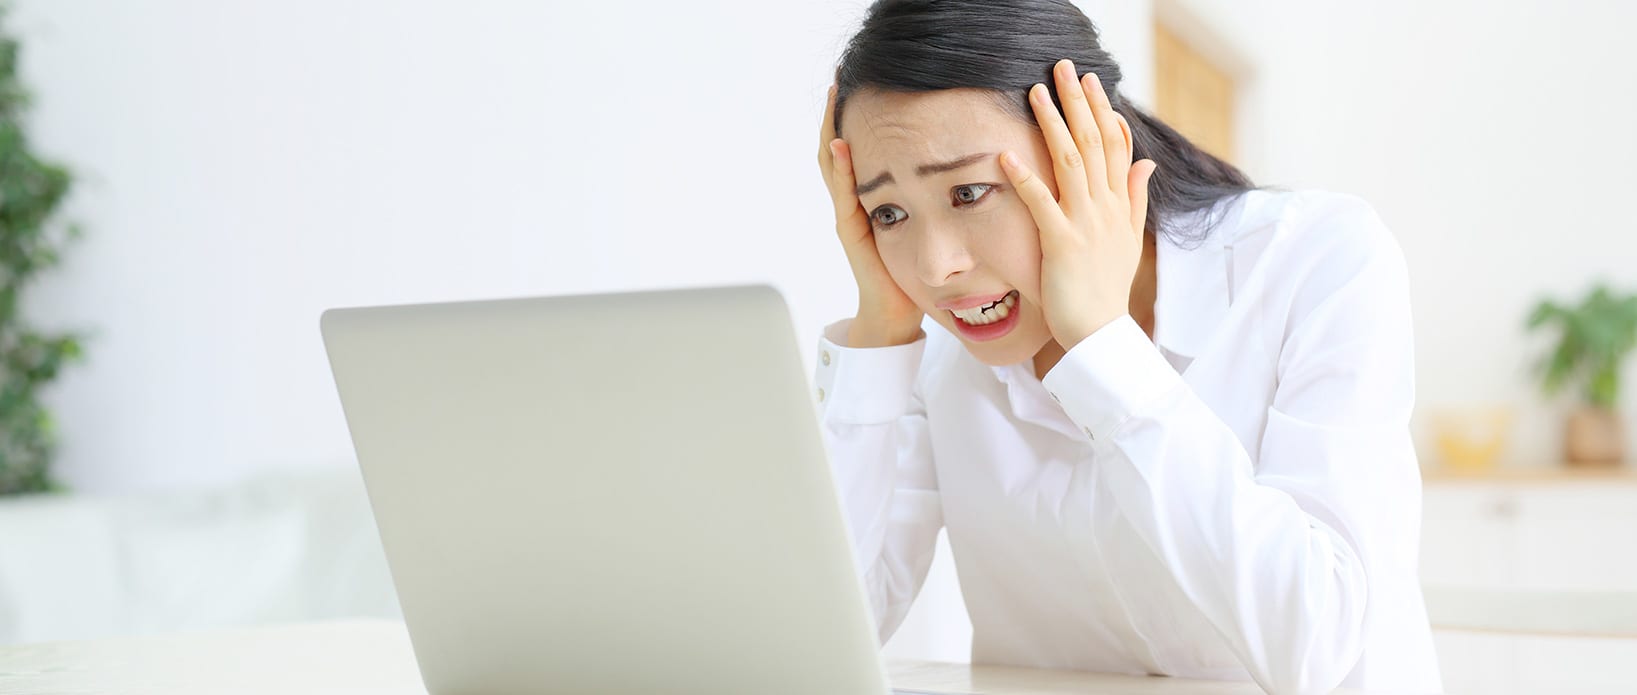 Woman having issues with her computer